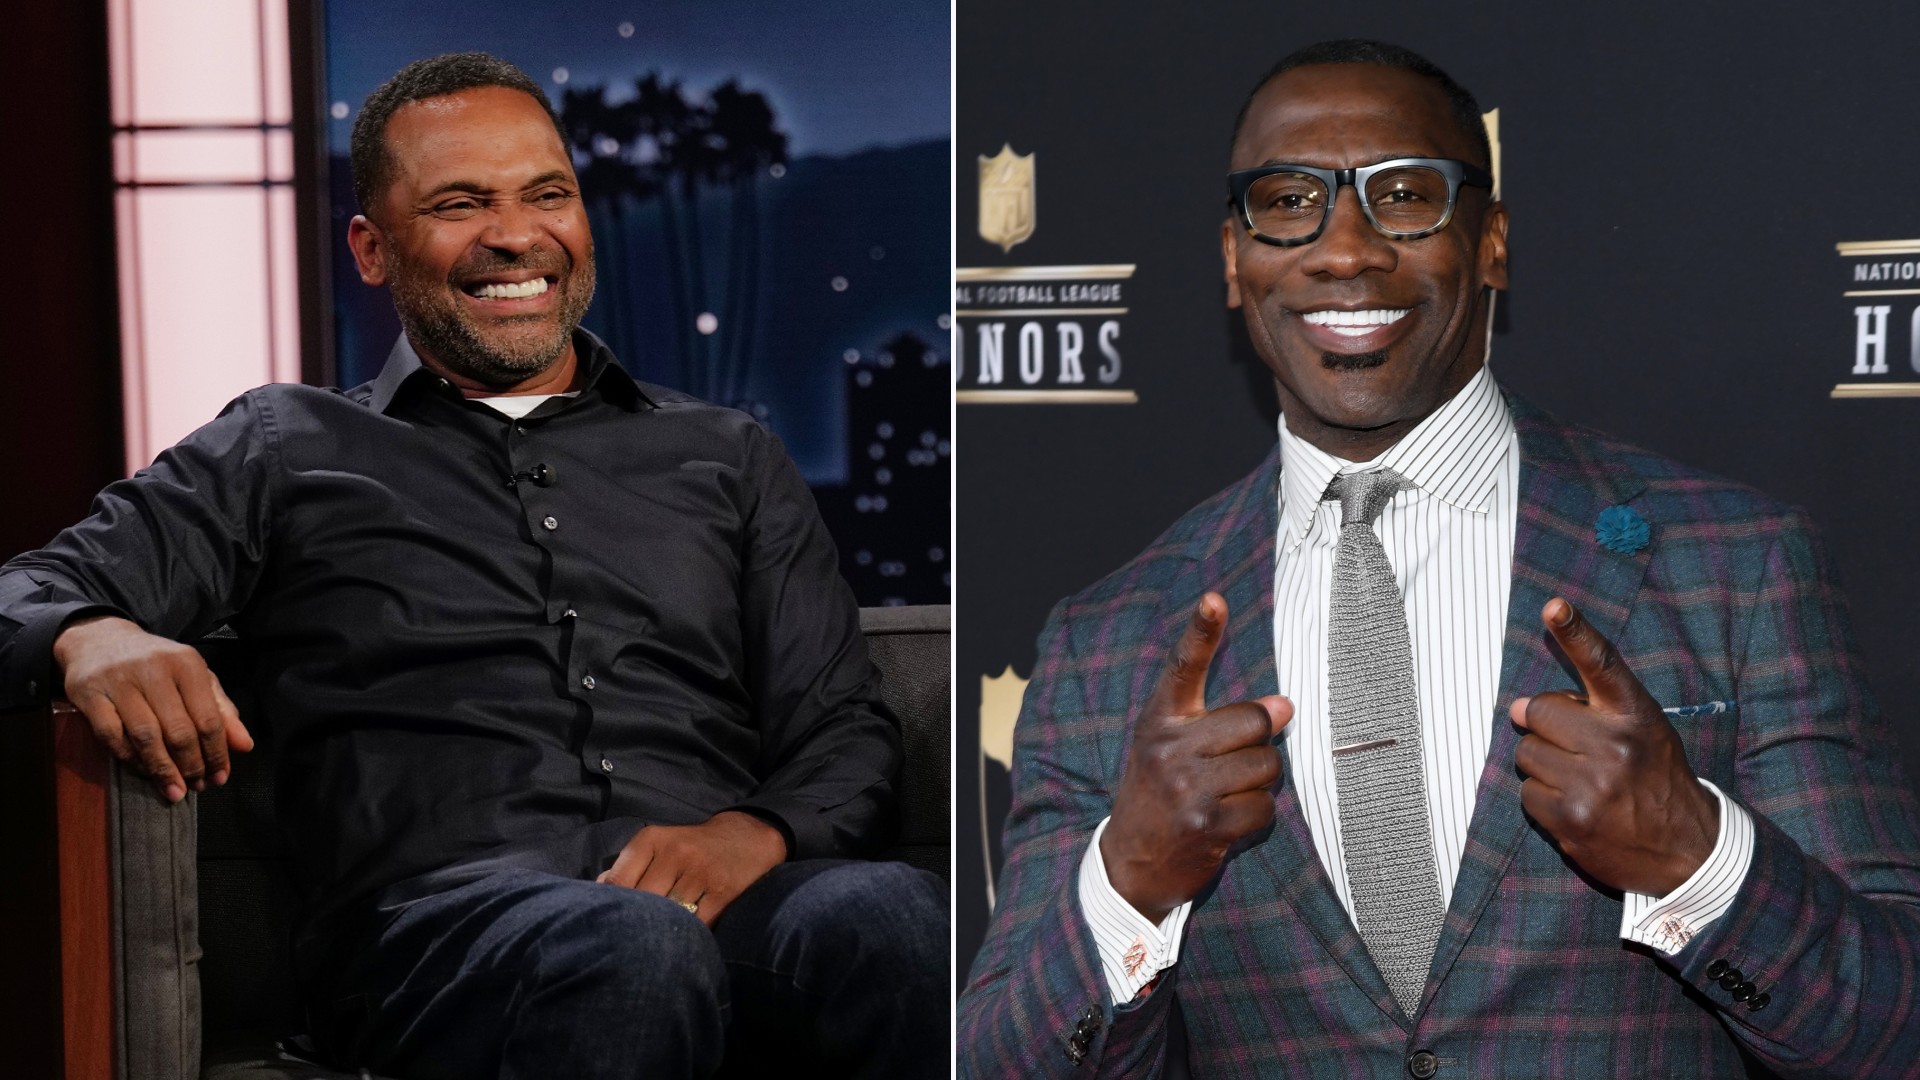 Peace! Shannon Sharpe And Mike Epps Link Up Following Their Online Spat: “We Are Good” thumbnail